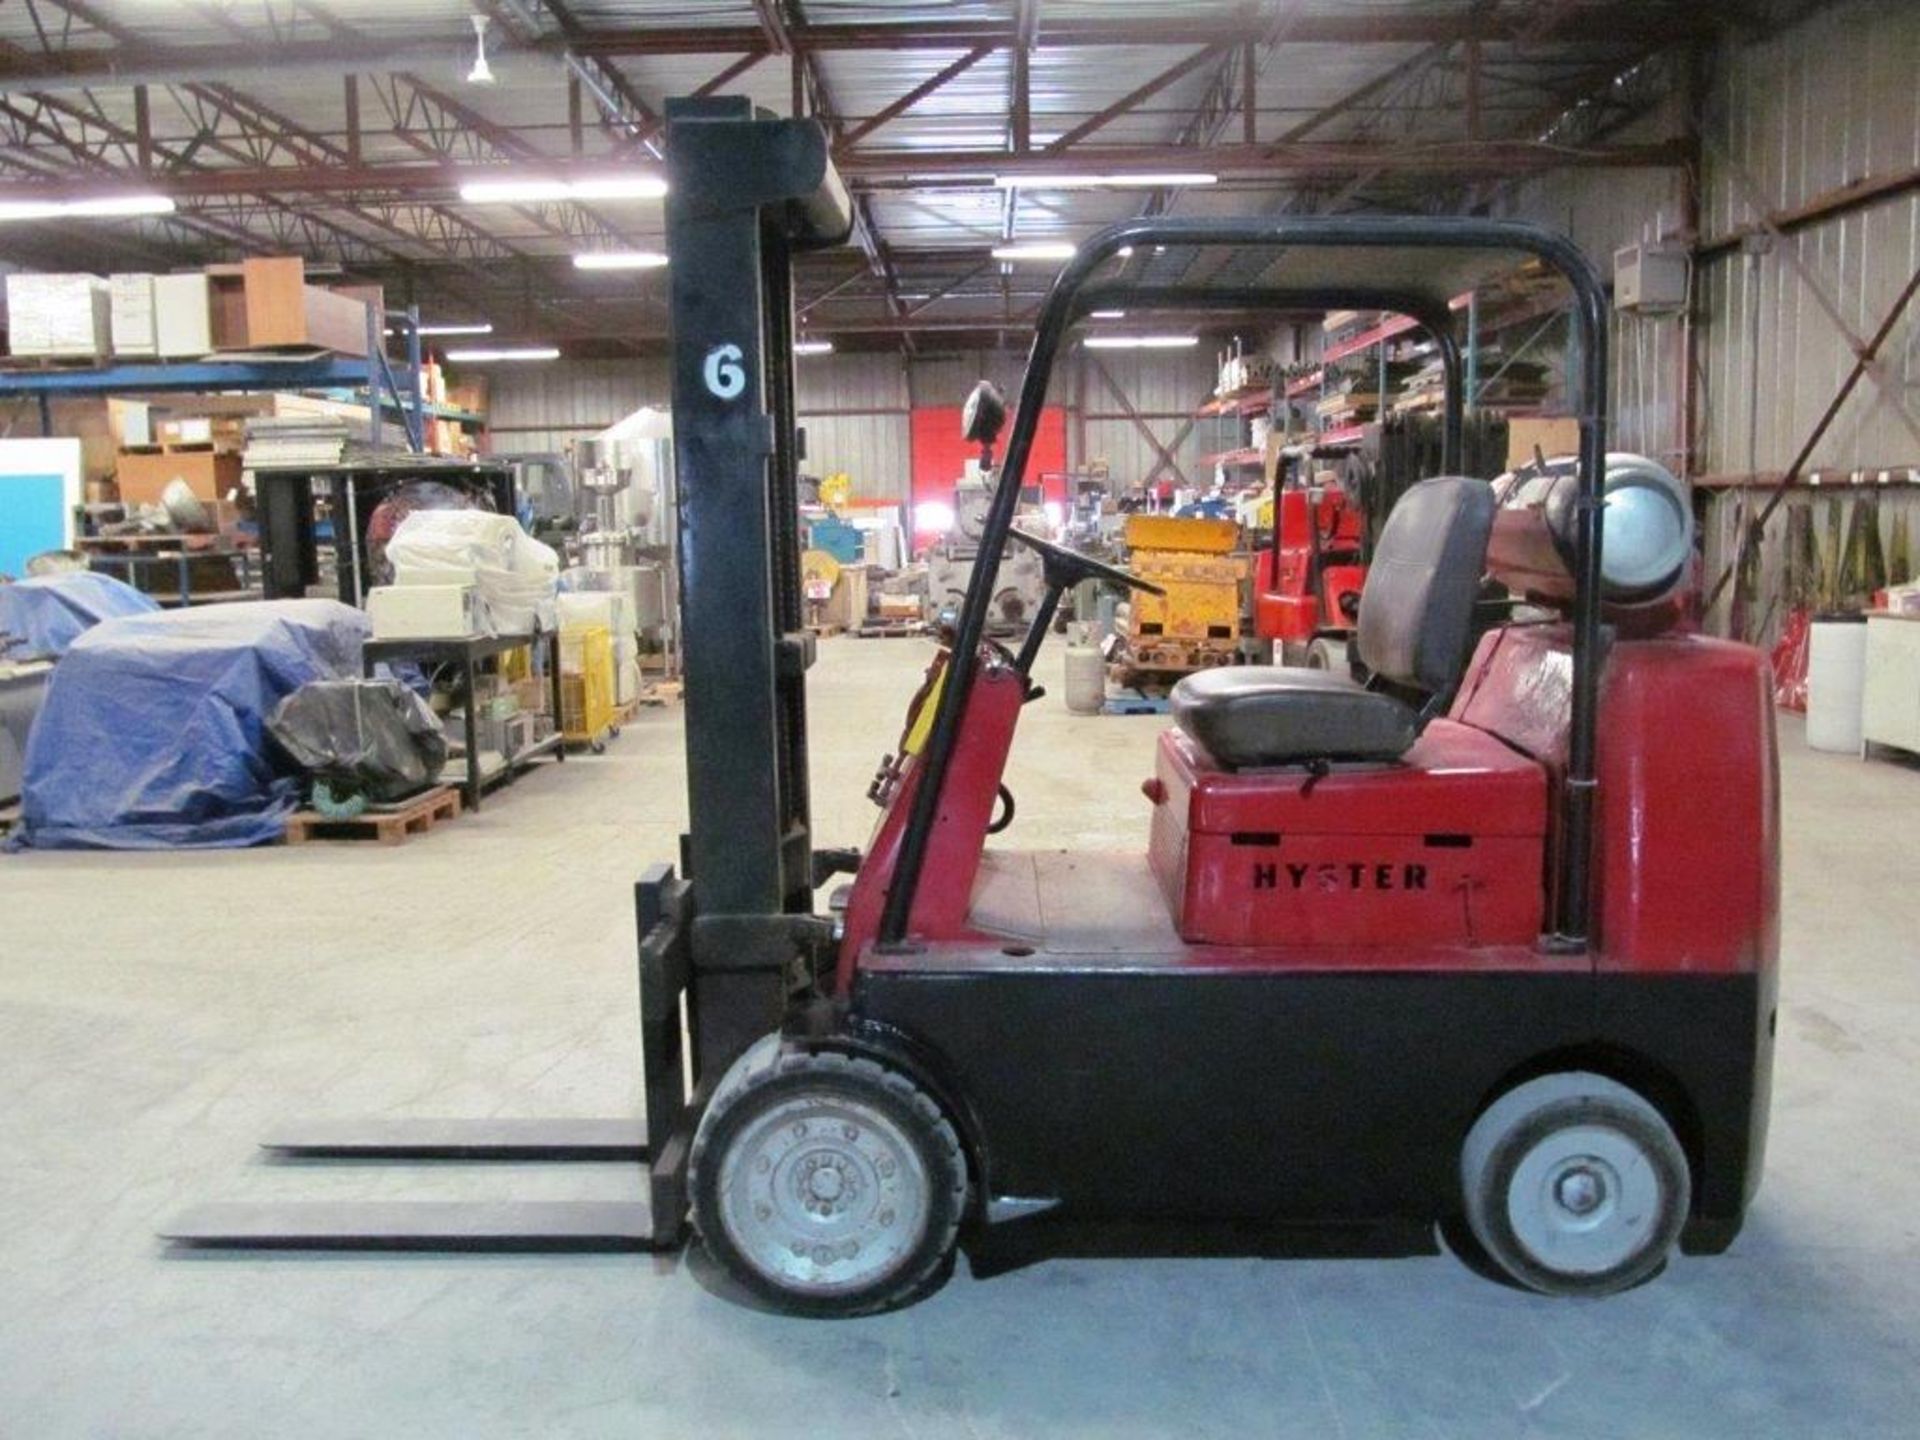 HYSTER PROPANE FORKLIFT HARD TIRES MODEL: S100B, LIFTING CAPACITY 10,000LBS, S/N A017D02351V, - Image 5 of 12